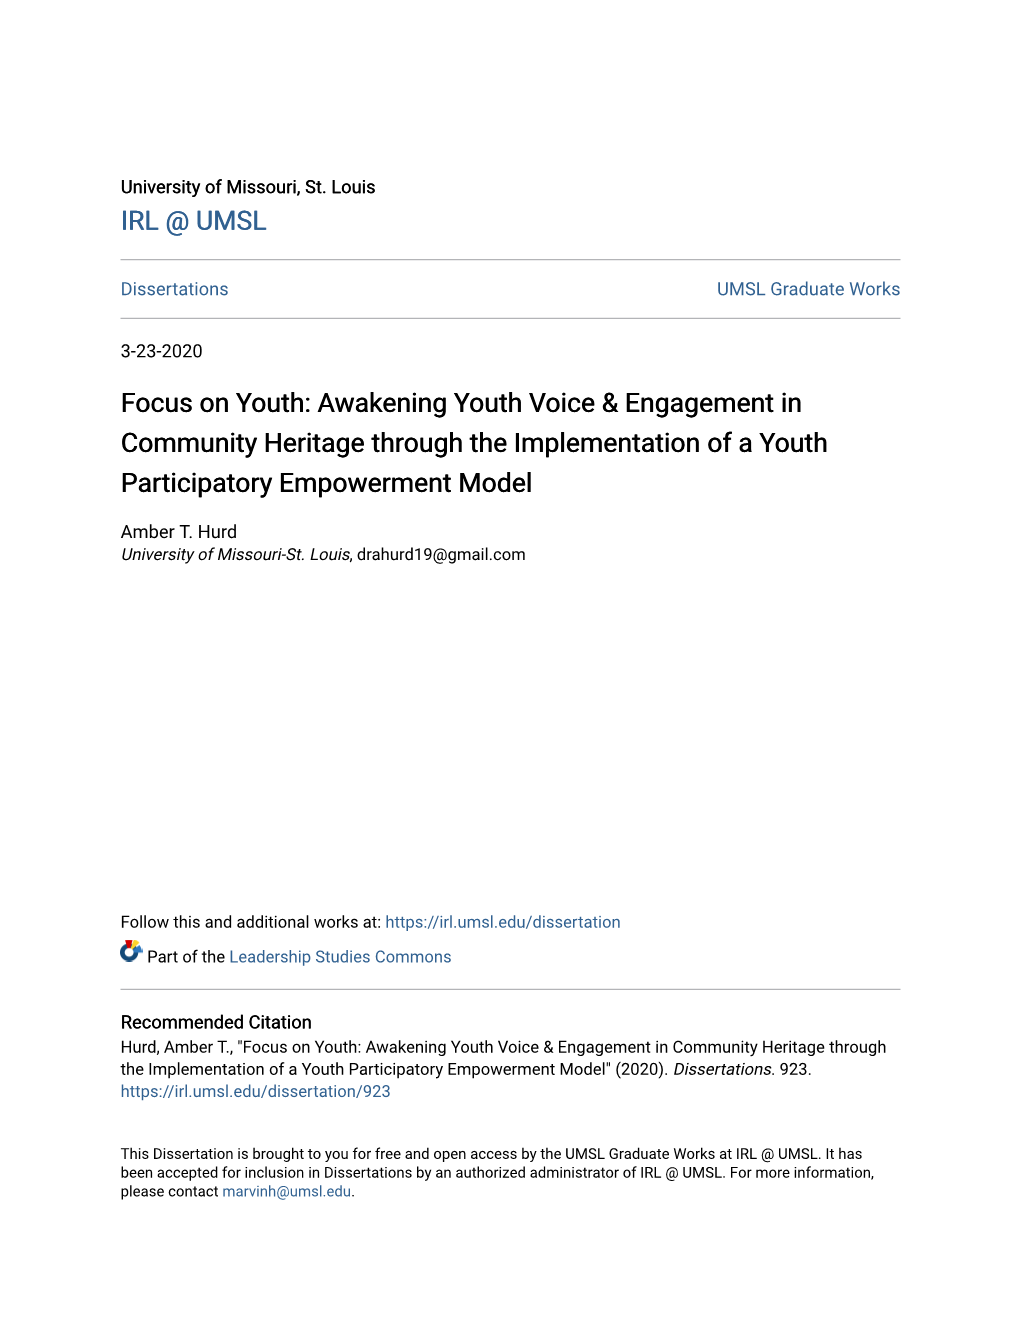 Focus on Youth: Awakening Youth Voice & Engagement in Community Heritage Through the Implementation of a Youth Participatory